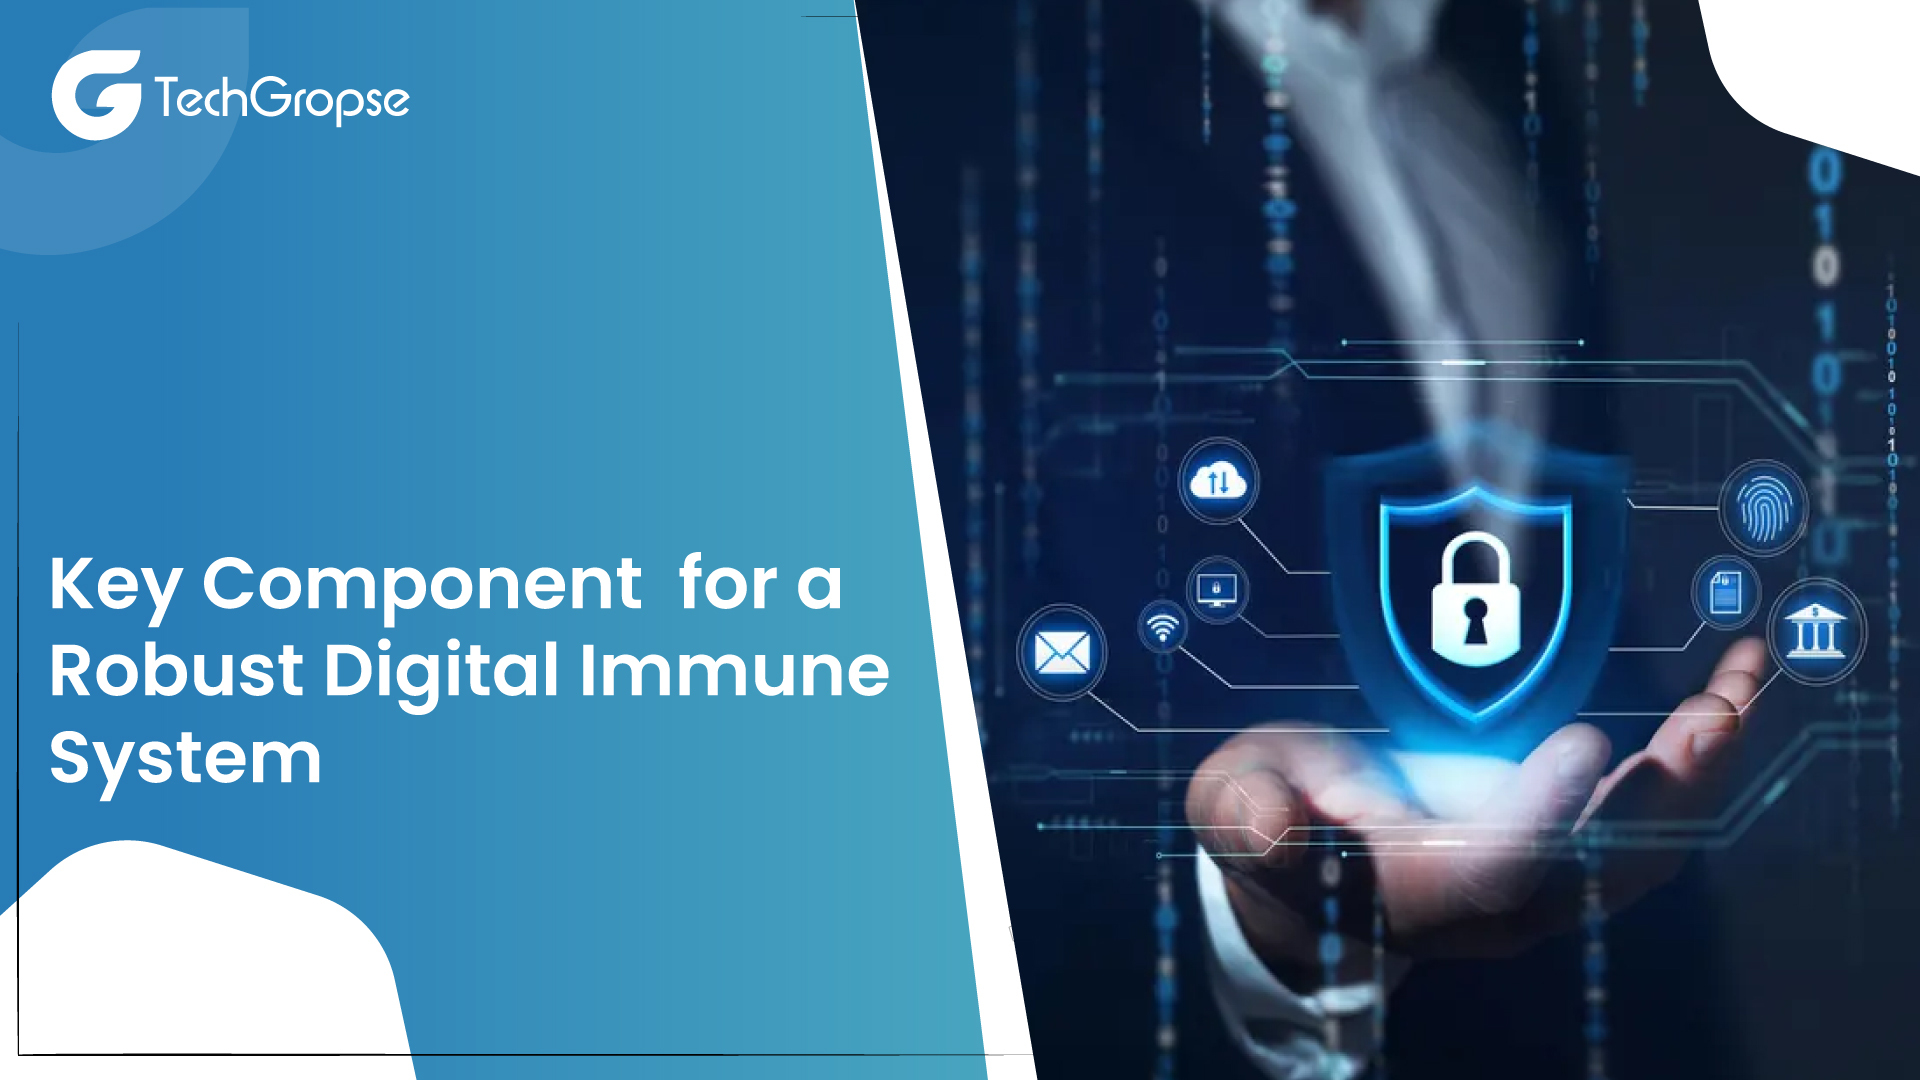 Key Component for a Robust Digital Immune System